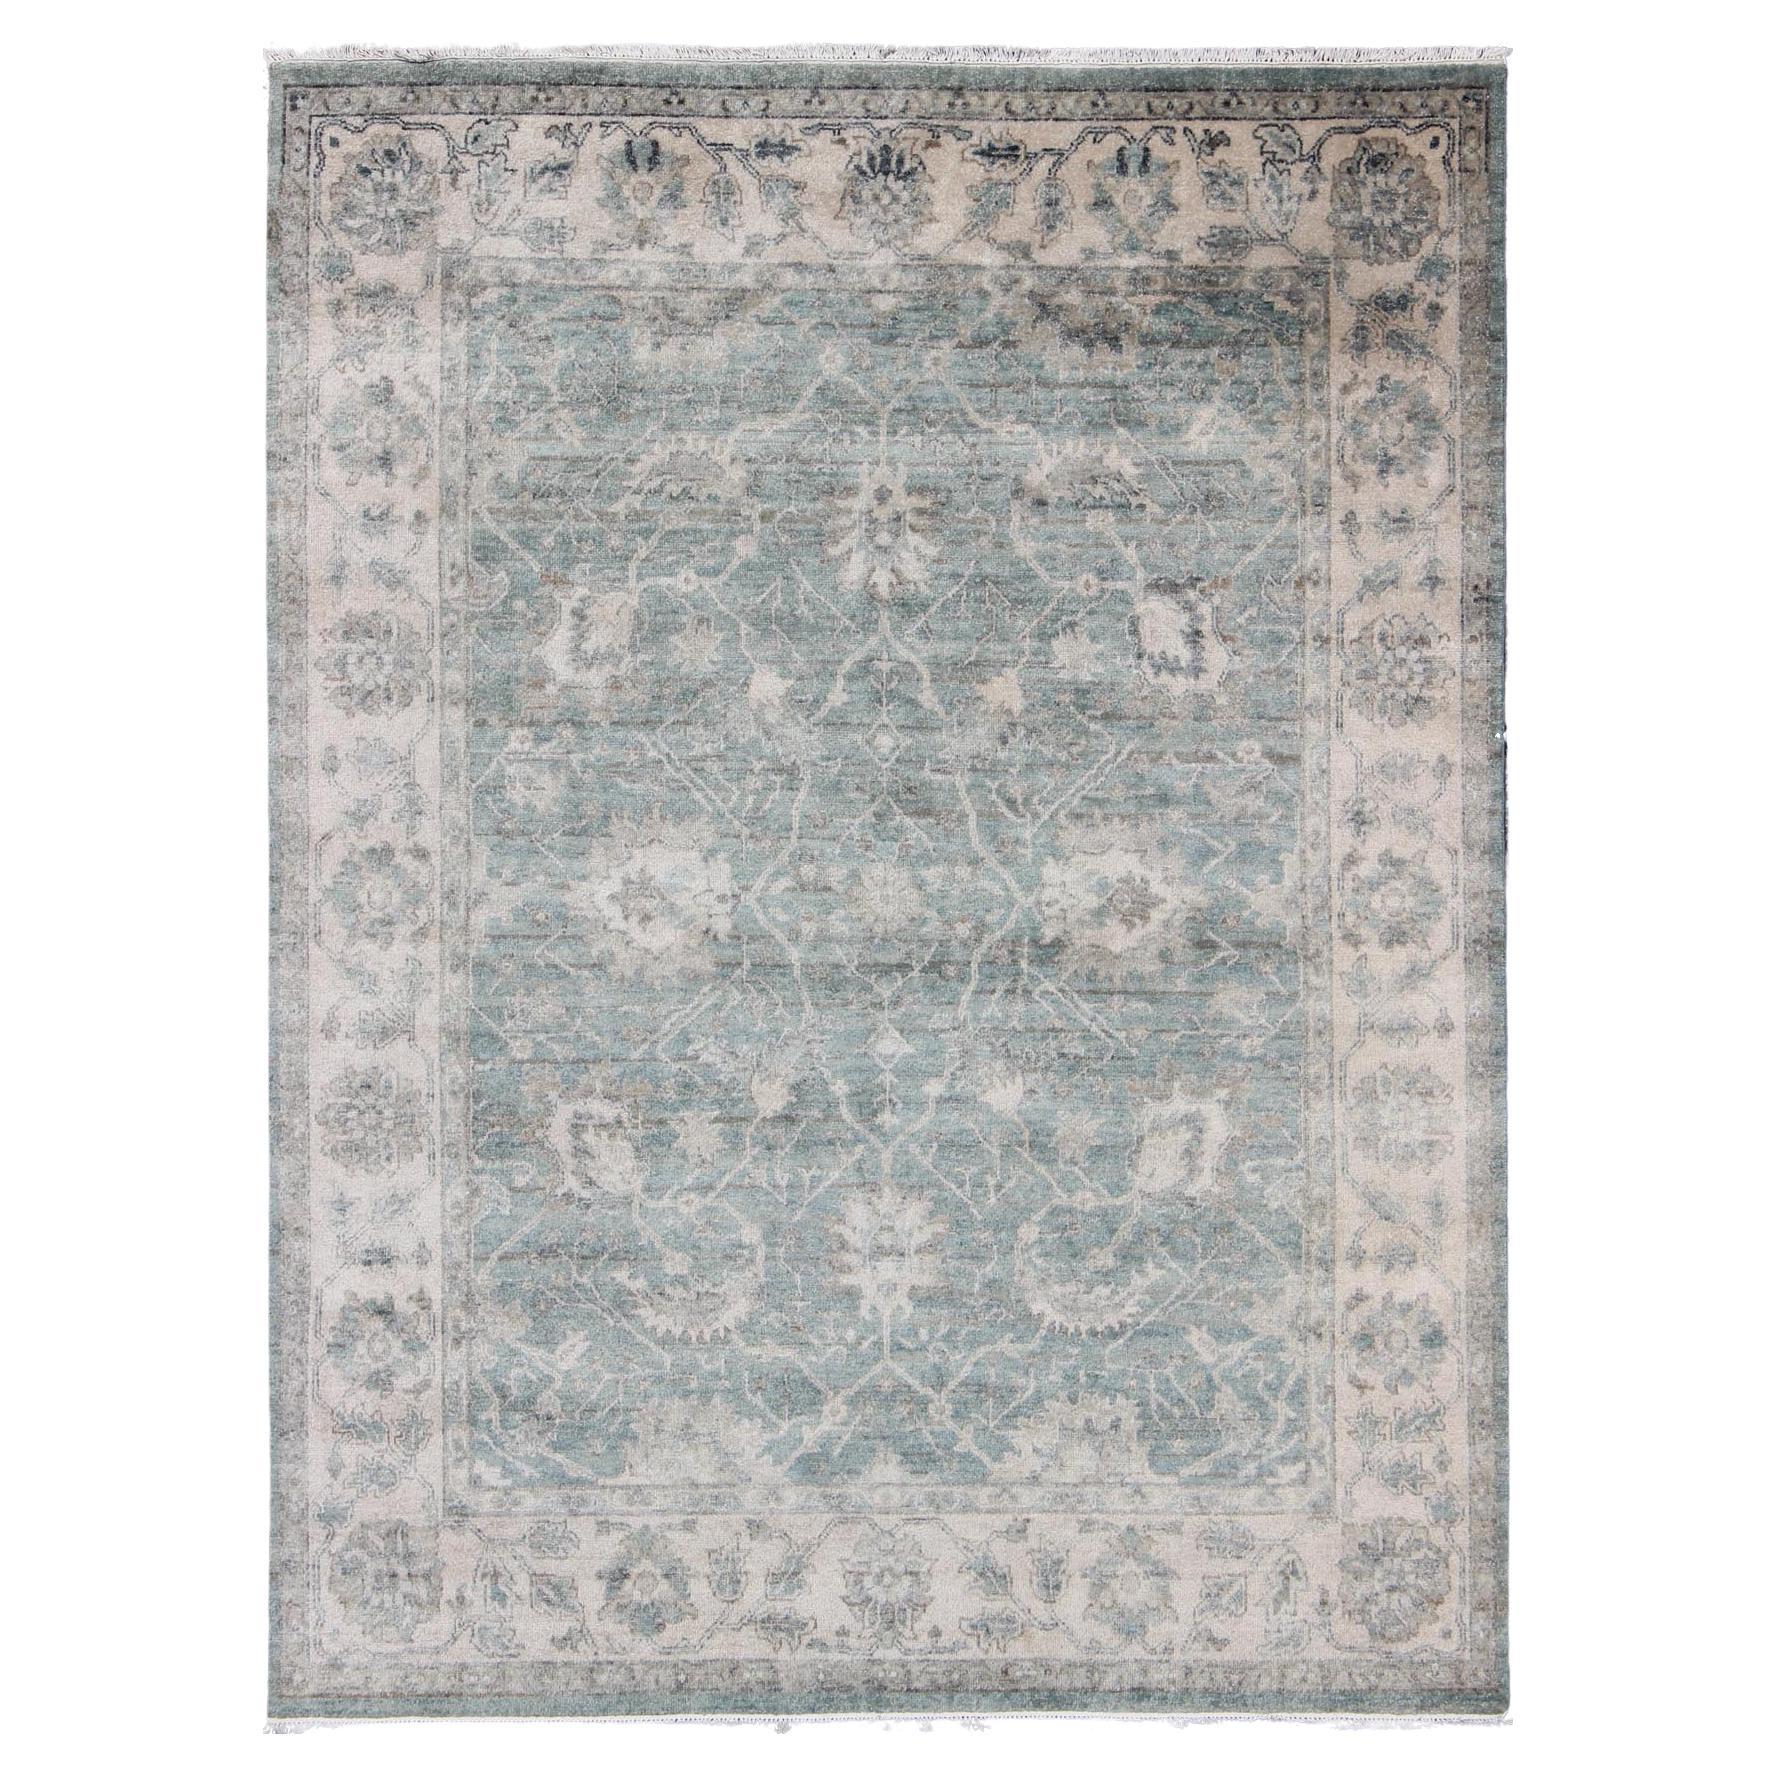 Keivan Woven Arts Turkish Oushak in Seafoam Green, Ivory and Light Gray For Sale